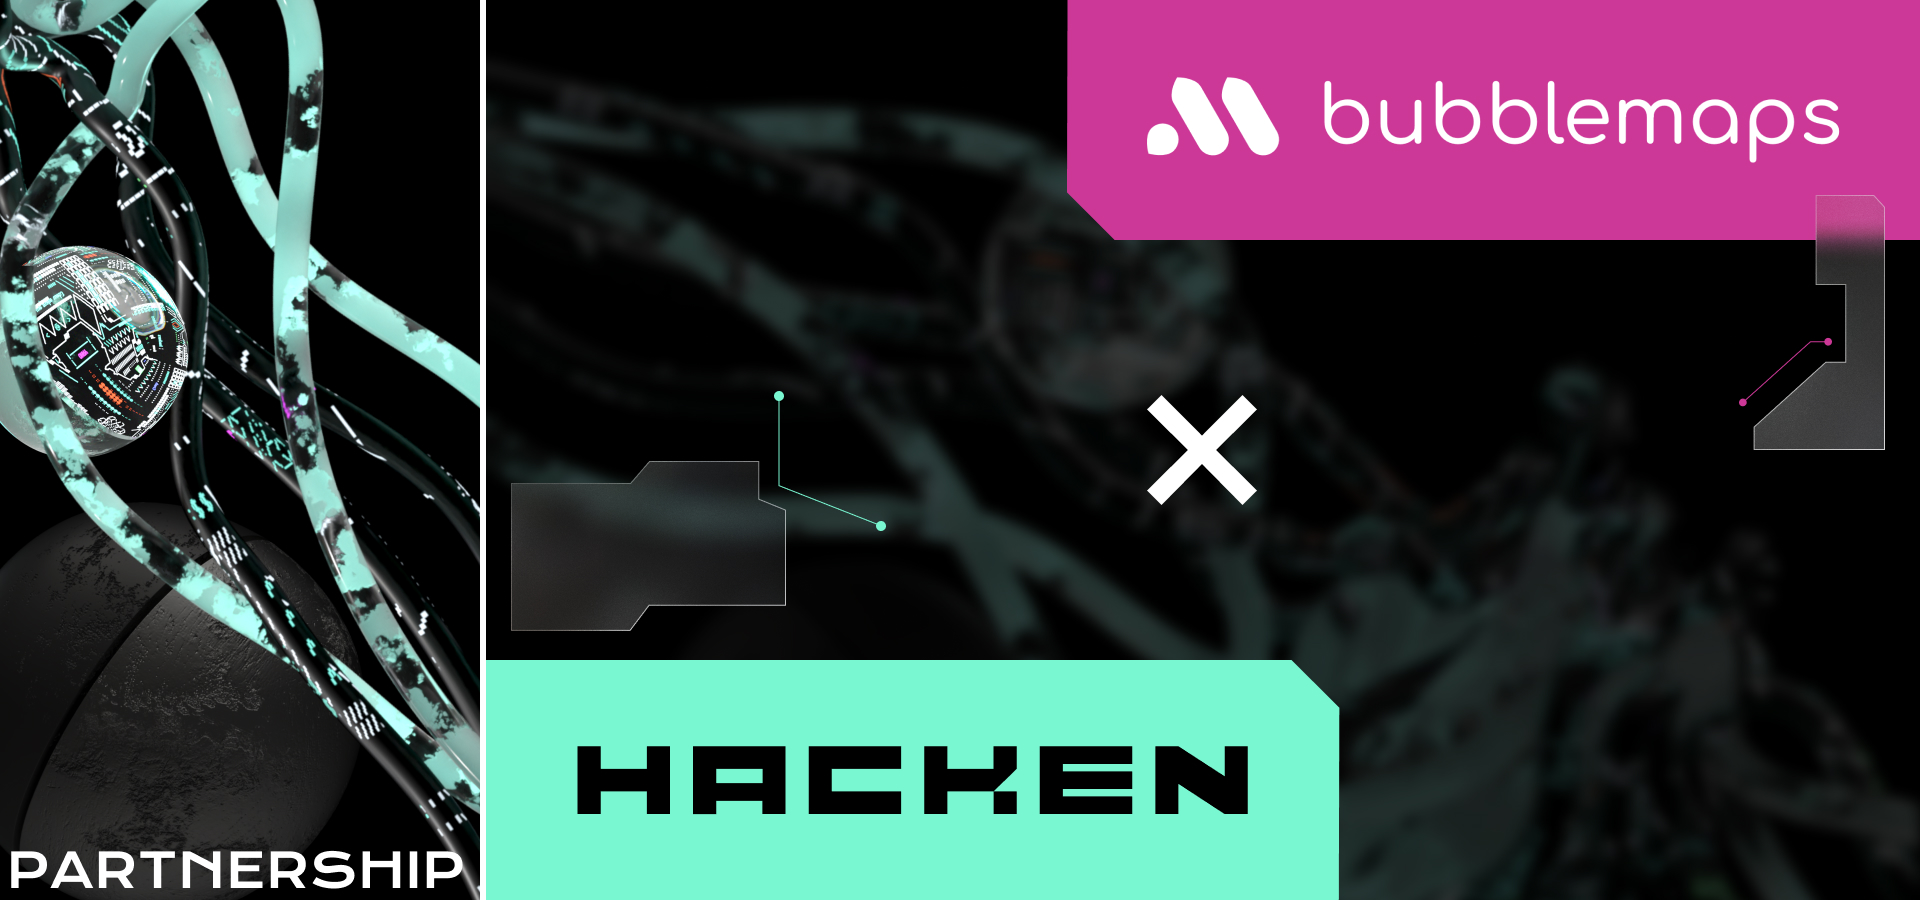 Bubblemaps is partnering with Hacken to bring additional safety to DeFi investors